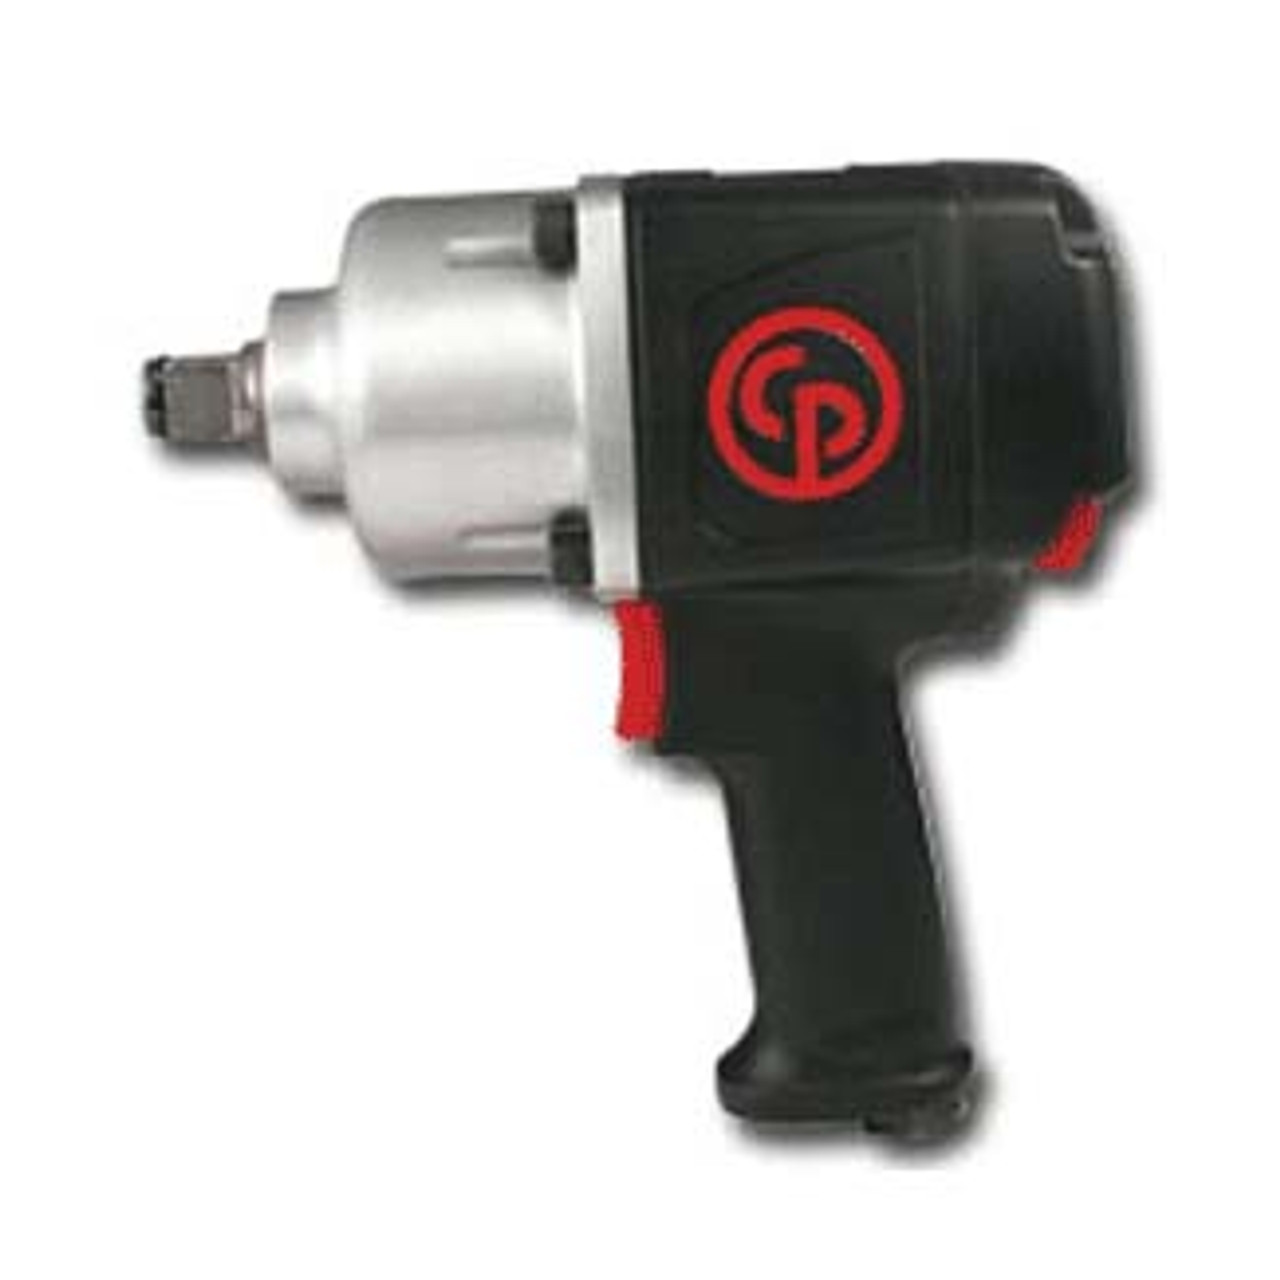 Heavy Duty High Power 3/4" Drive Impact Wrench, CP7763